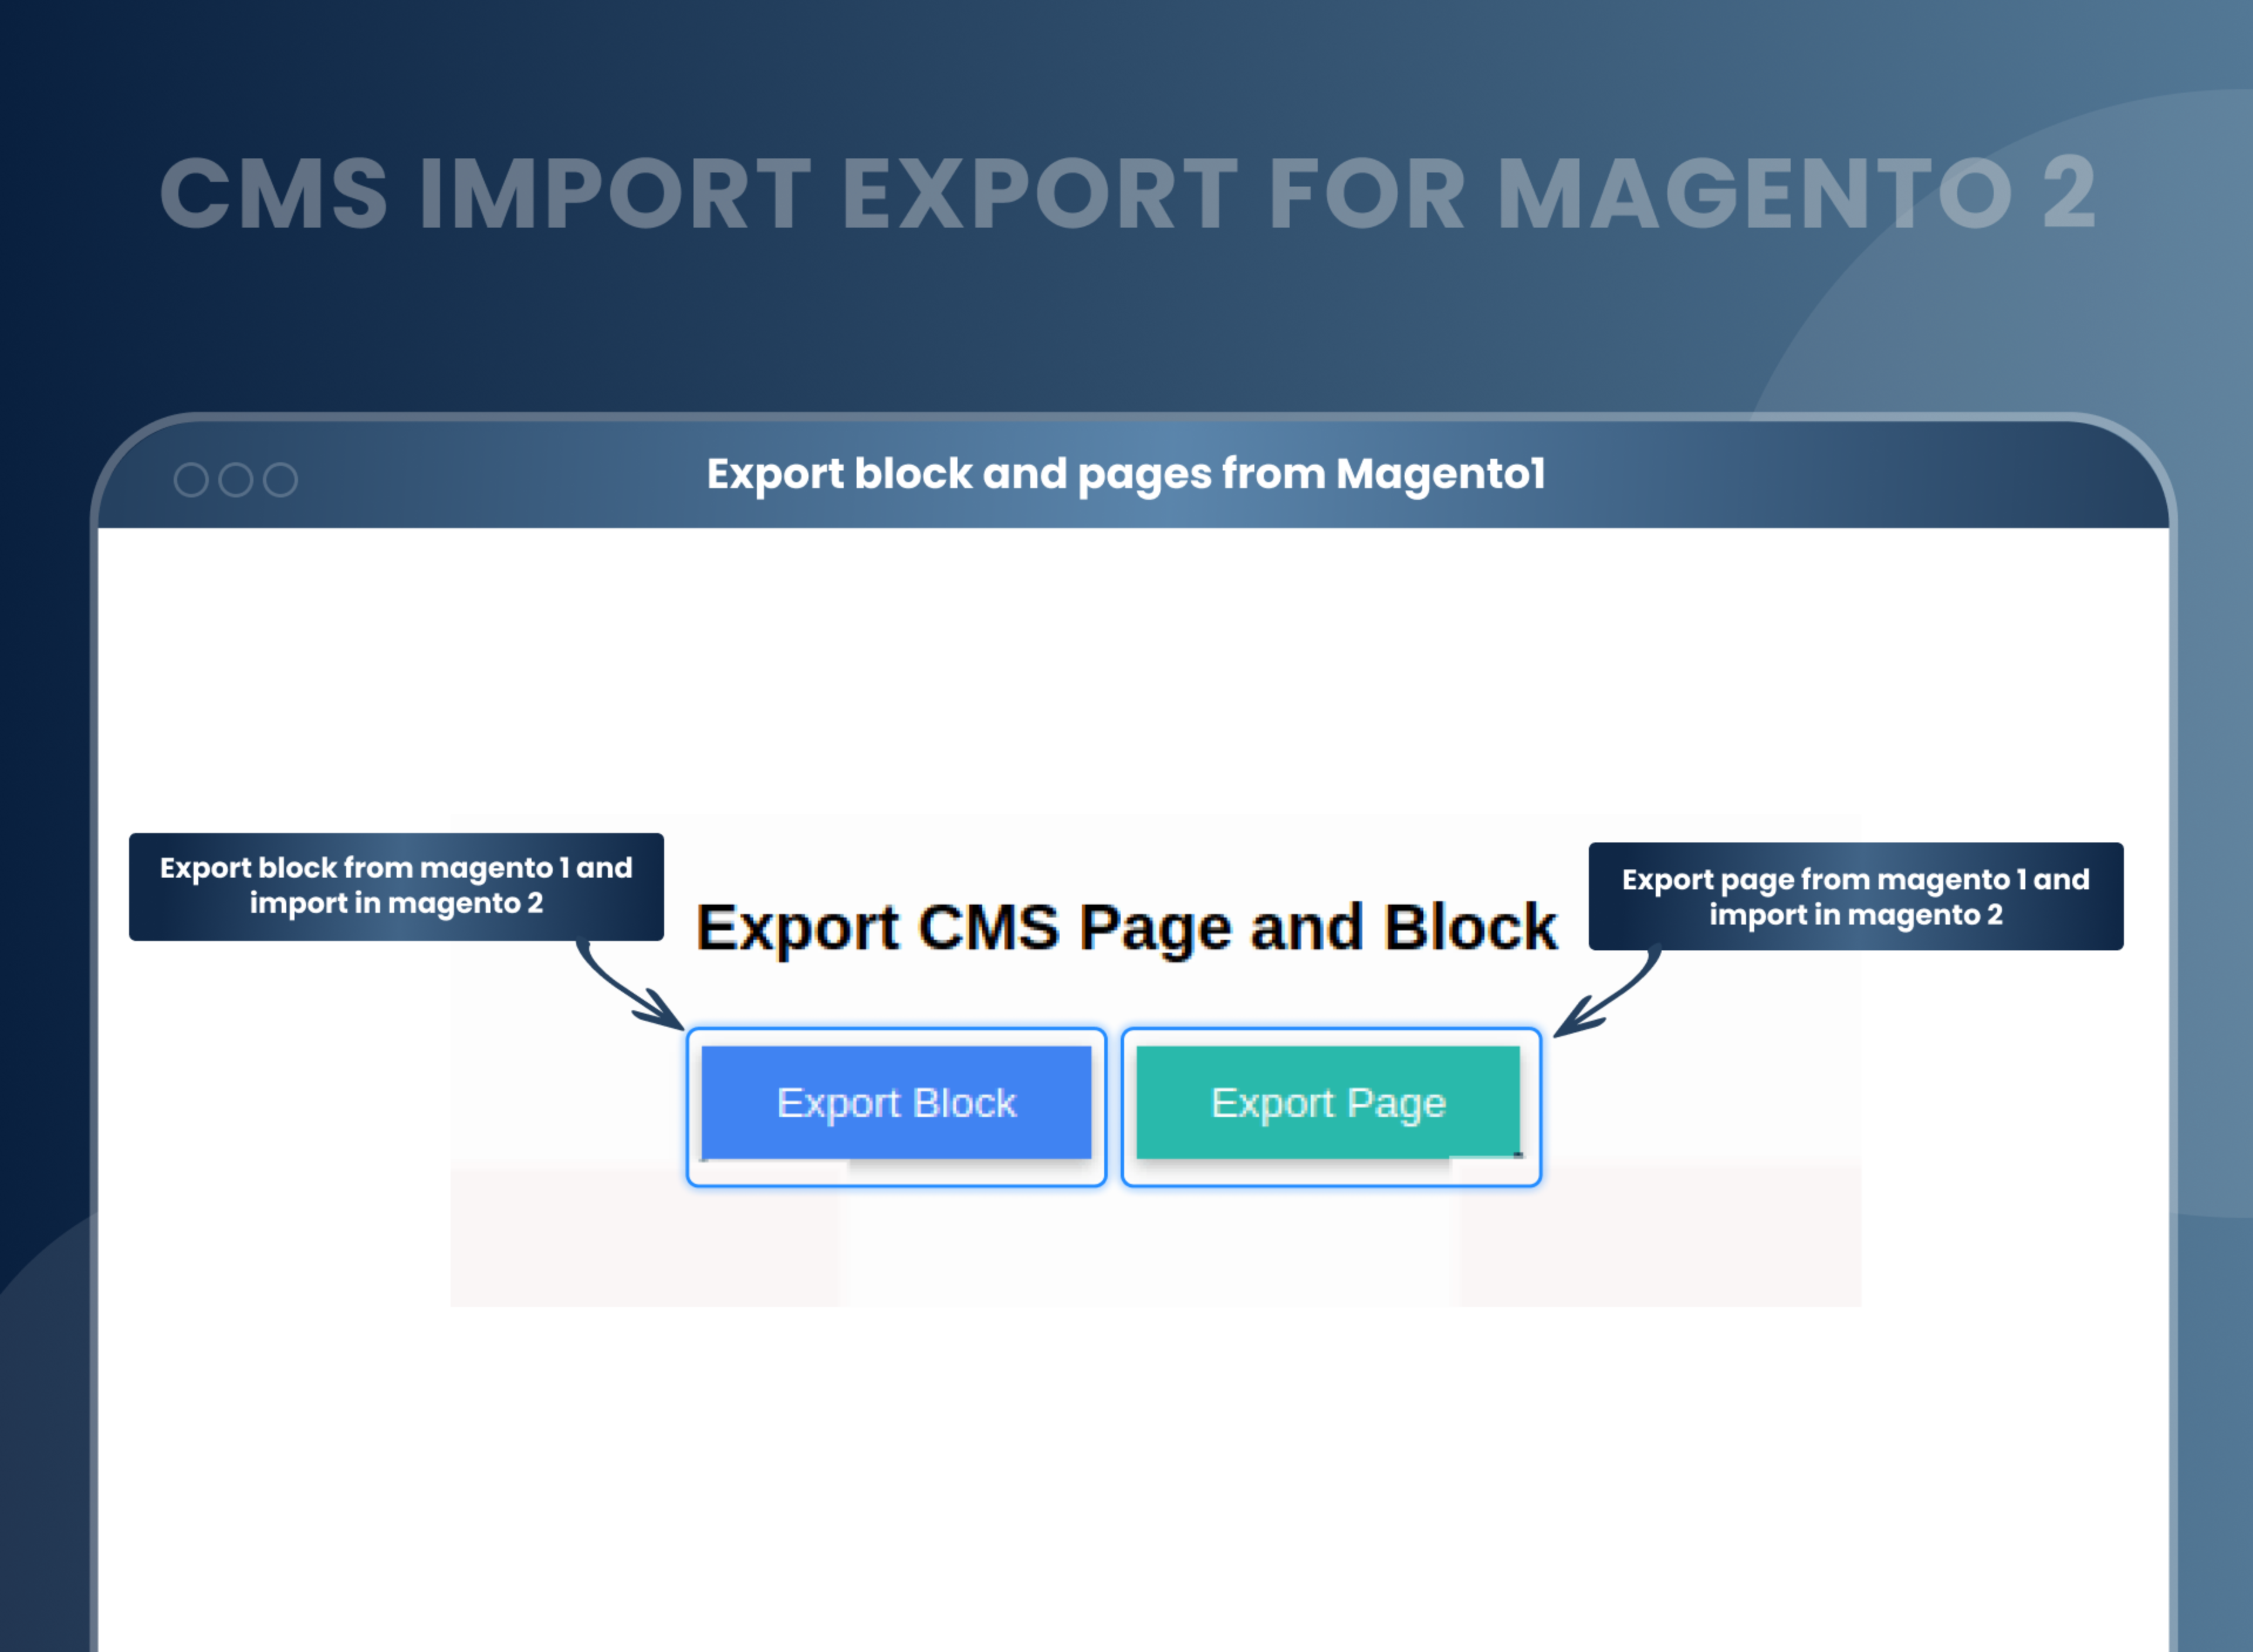 Export block and pages from Magento1